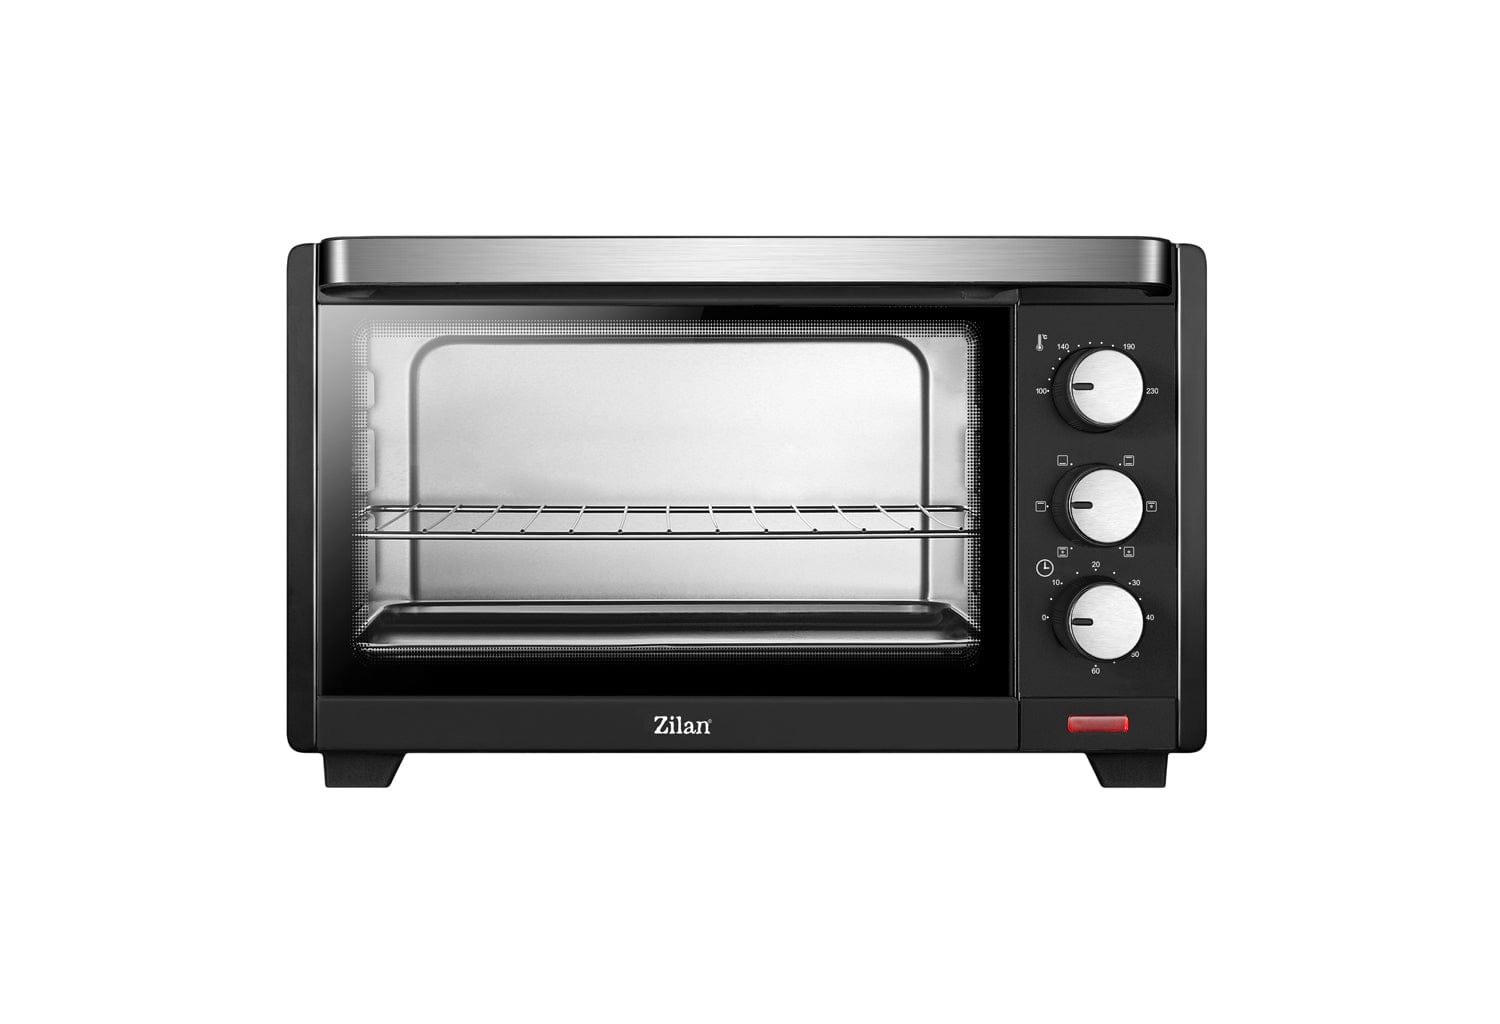 Buy Zilan 19L Electric Oven - ZLN0980 | Supply Master Accra, Ghana Kitchen Appliances Buy Tools hardware Building materials